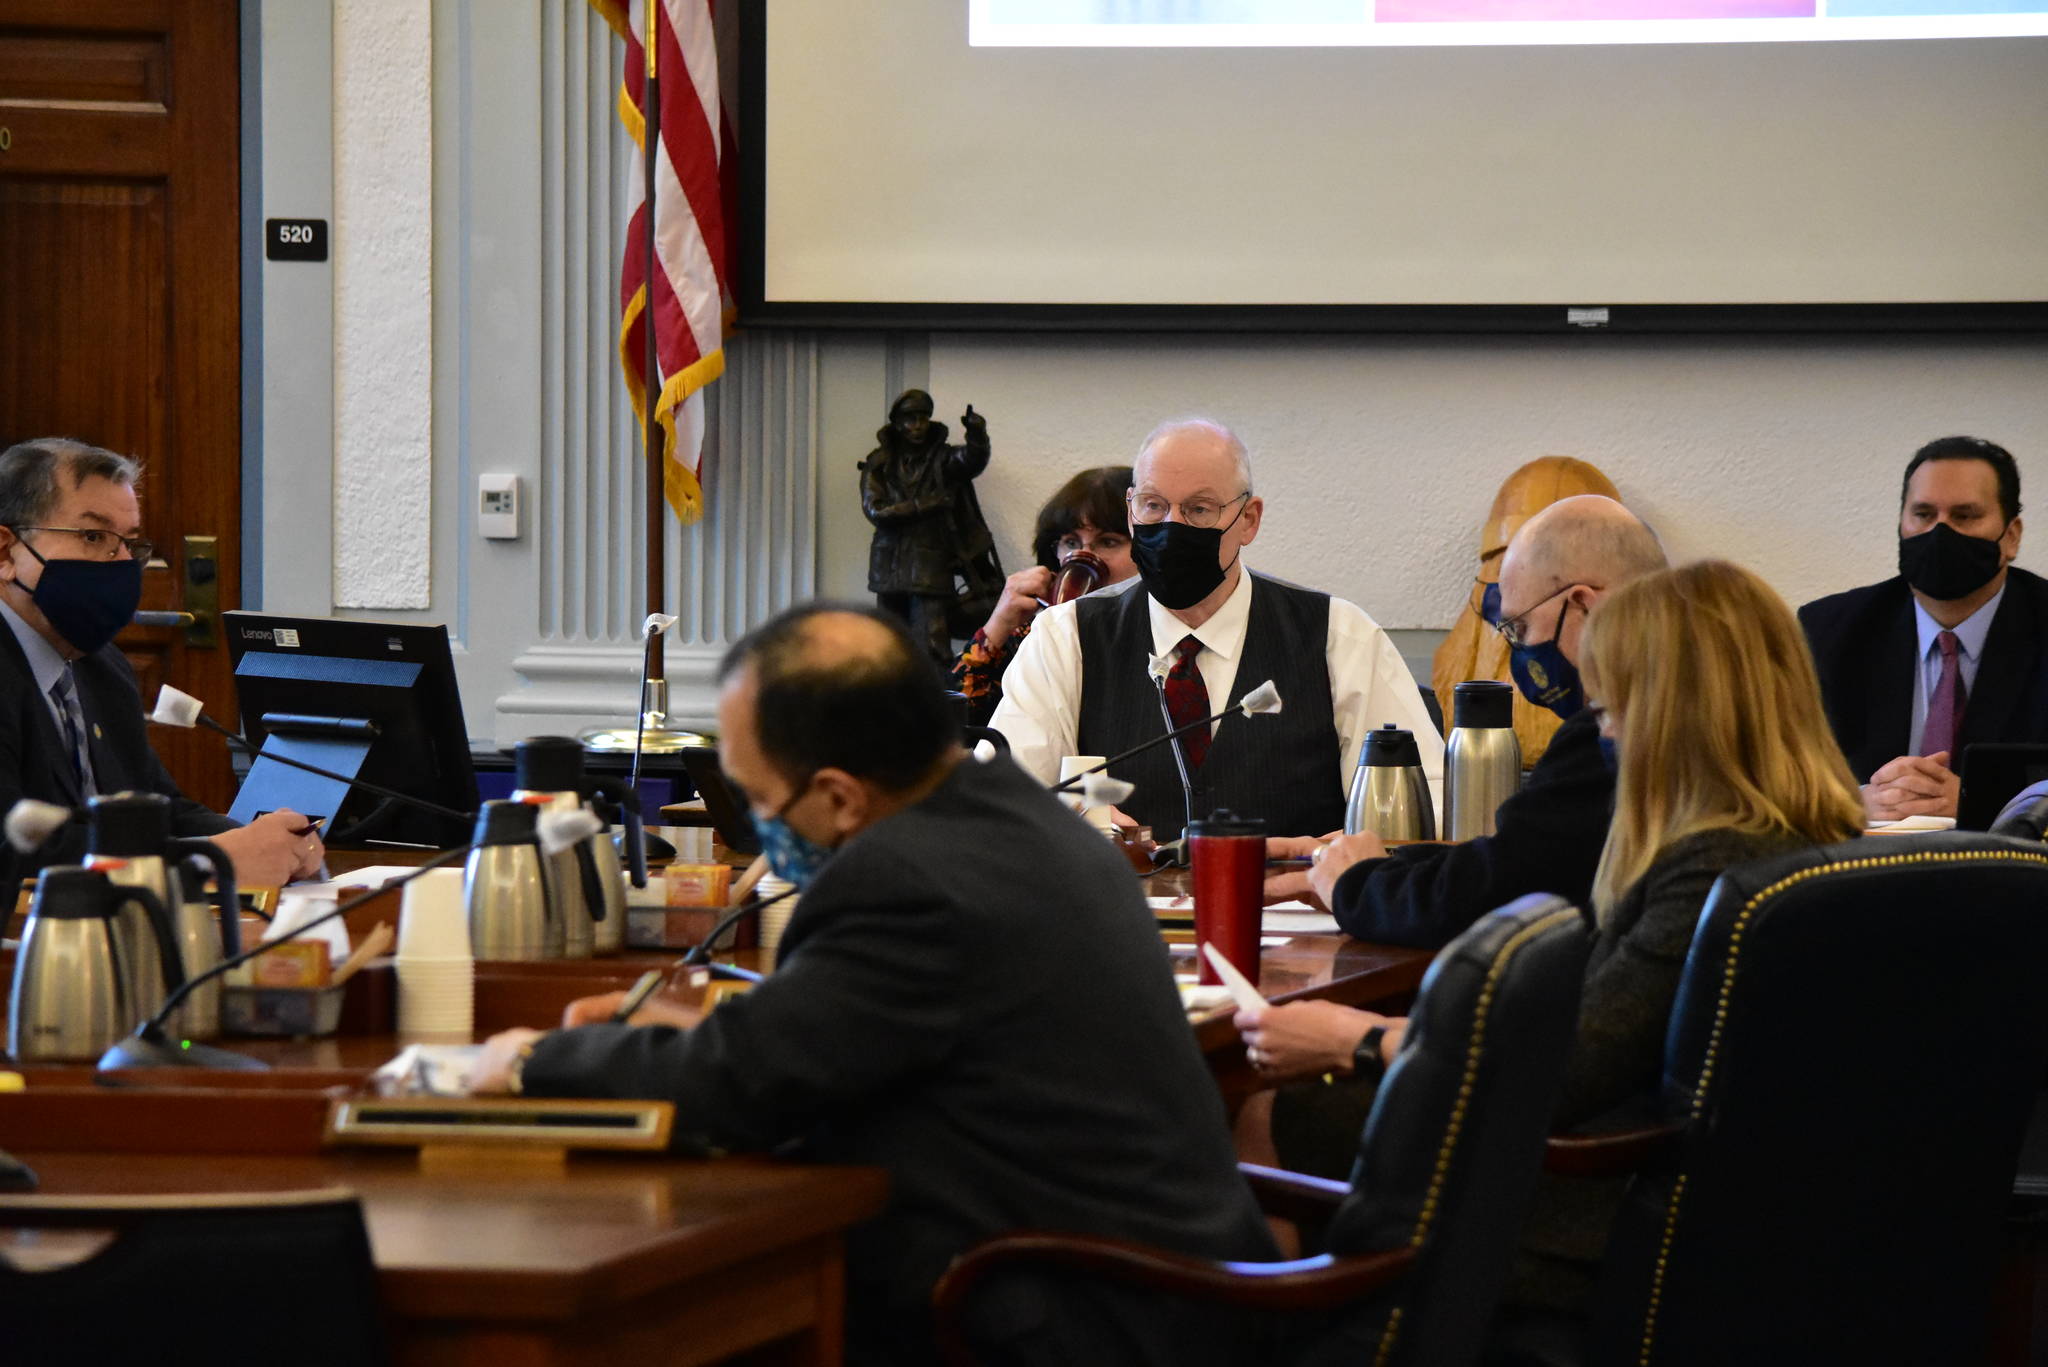 The Senate Finance Committee, seen here with chair Sen. Bert Stedman, R-Sitka, leading a meeting on Jan. 27, discussed Monday Gov. Mike Dunleavy's propsoal for a $1.4 billion supplemental budget. Most of that money would go to paying out a supplemental Permanent Fund Dividend. (Peter Segall / Juneau Empire)